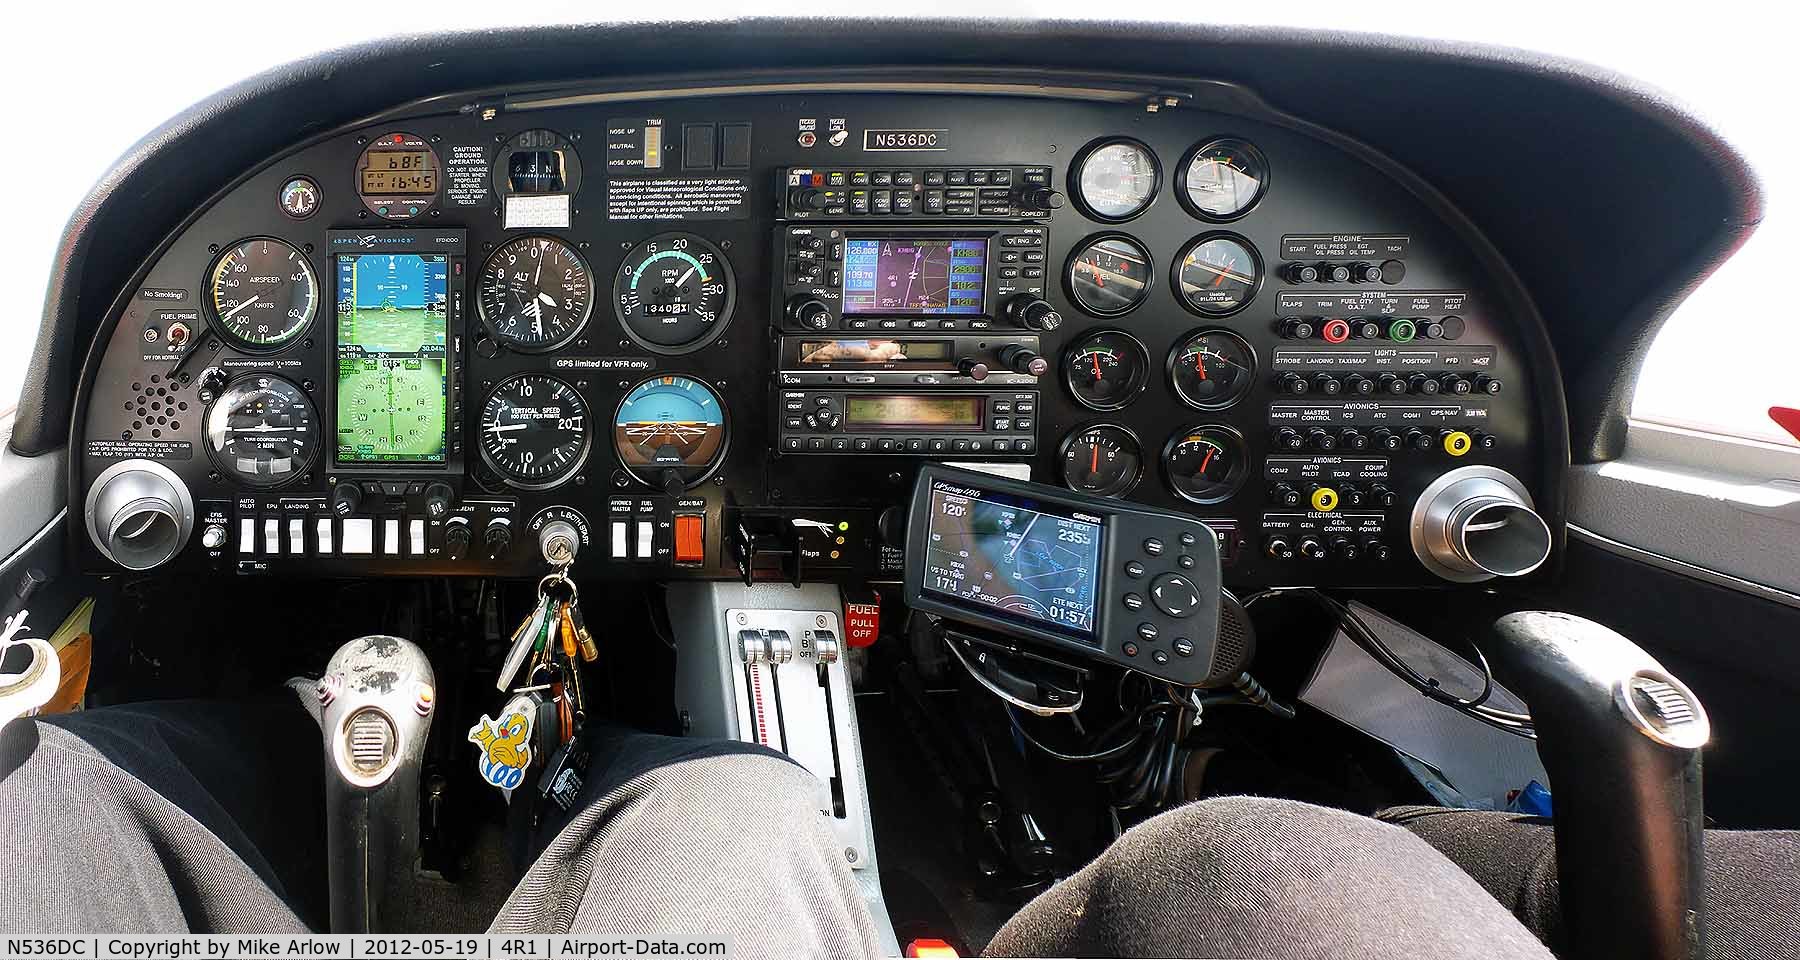 N536DC, 2003 Diamond DA-20C-1 Eclipse C/N C0236, Cockpit panorama view showing synthetic vision on Aspen PFD1000, T-CAS on Aspen PFD 1000, and ATC radar on Garmin 430W GPS with weather and terrain, and backup Garmin 496 with weather and terrain.